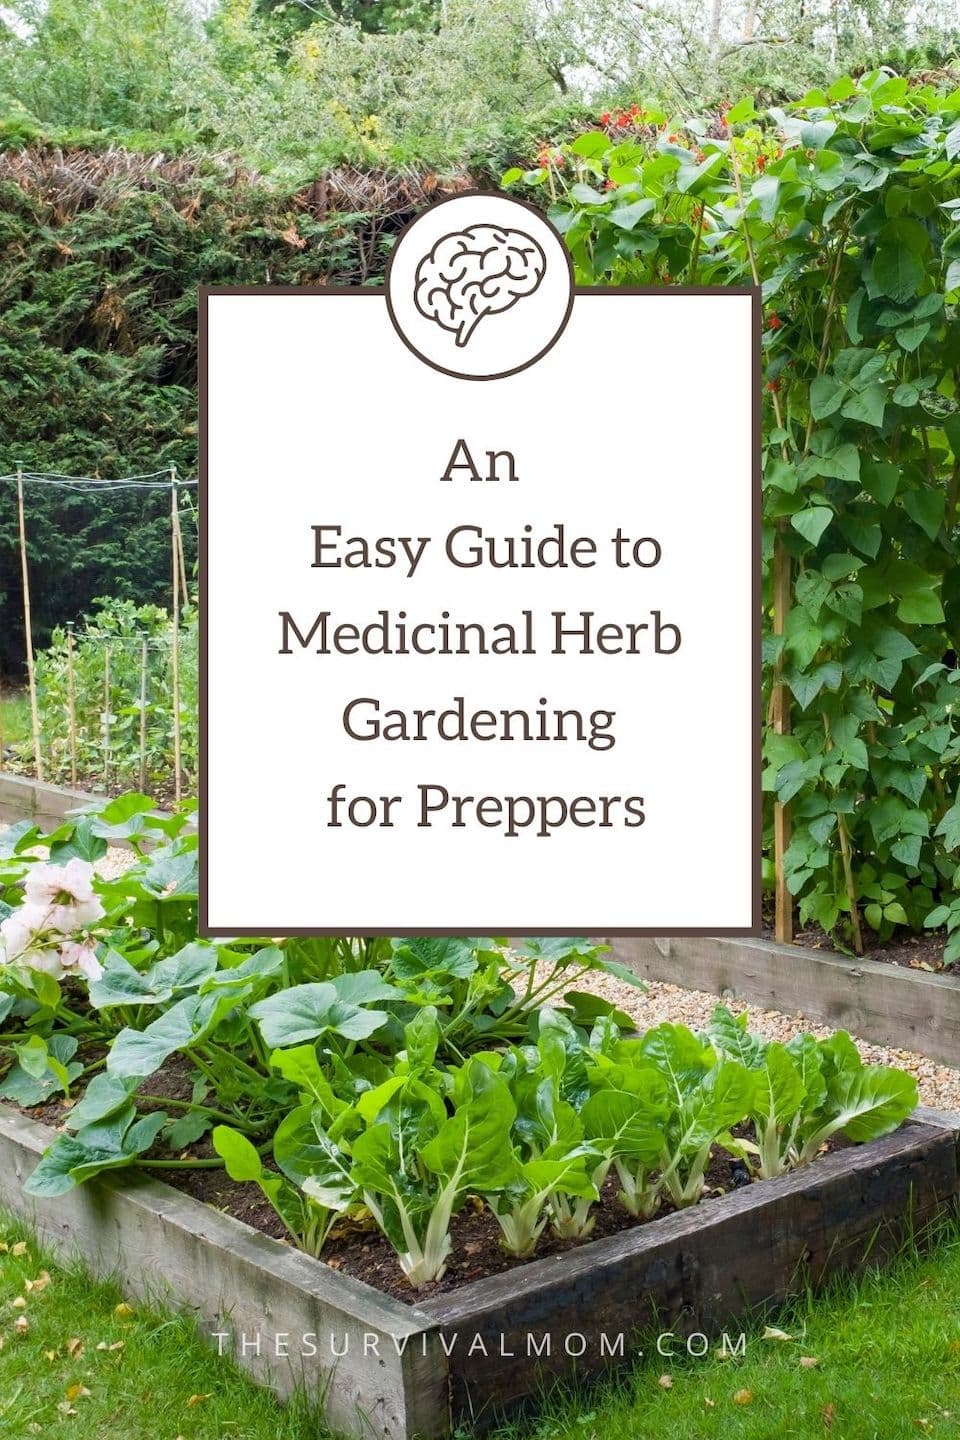 Herb Gardening for Preppers